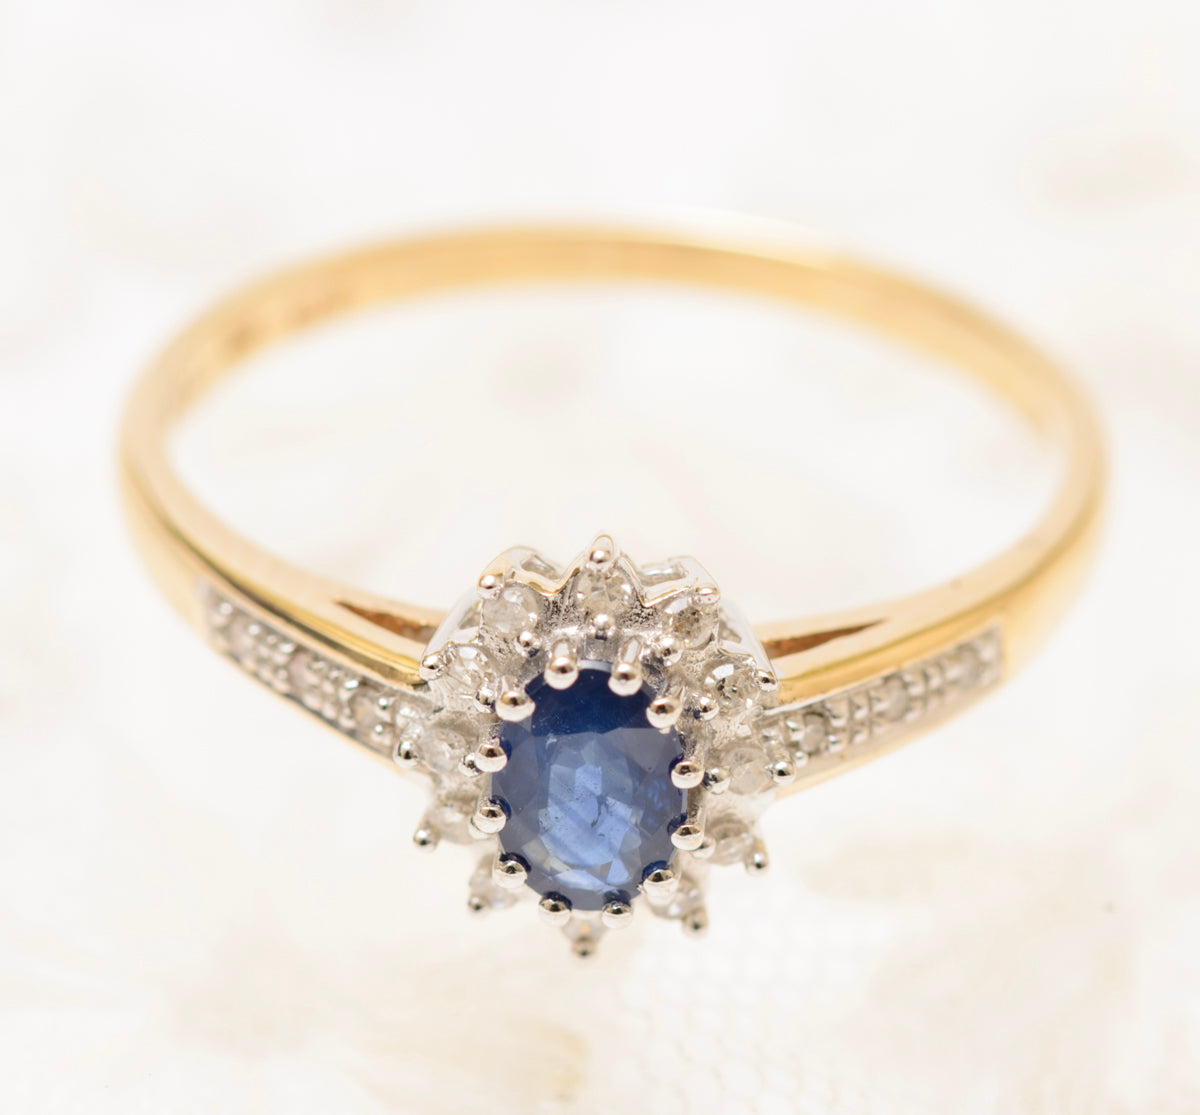 Vintage Natural Sapphire & Diamond Ring In 9ct Gold Halo Design UK Size S1/2 (A1832)